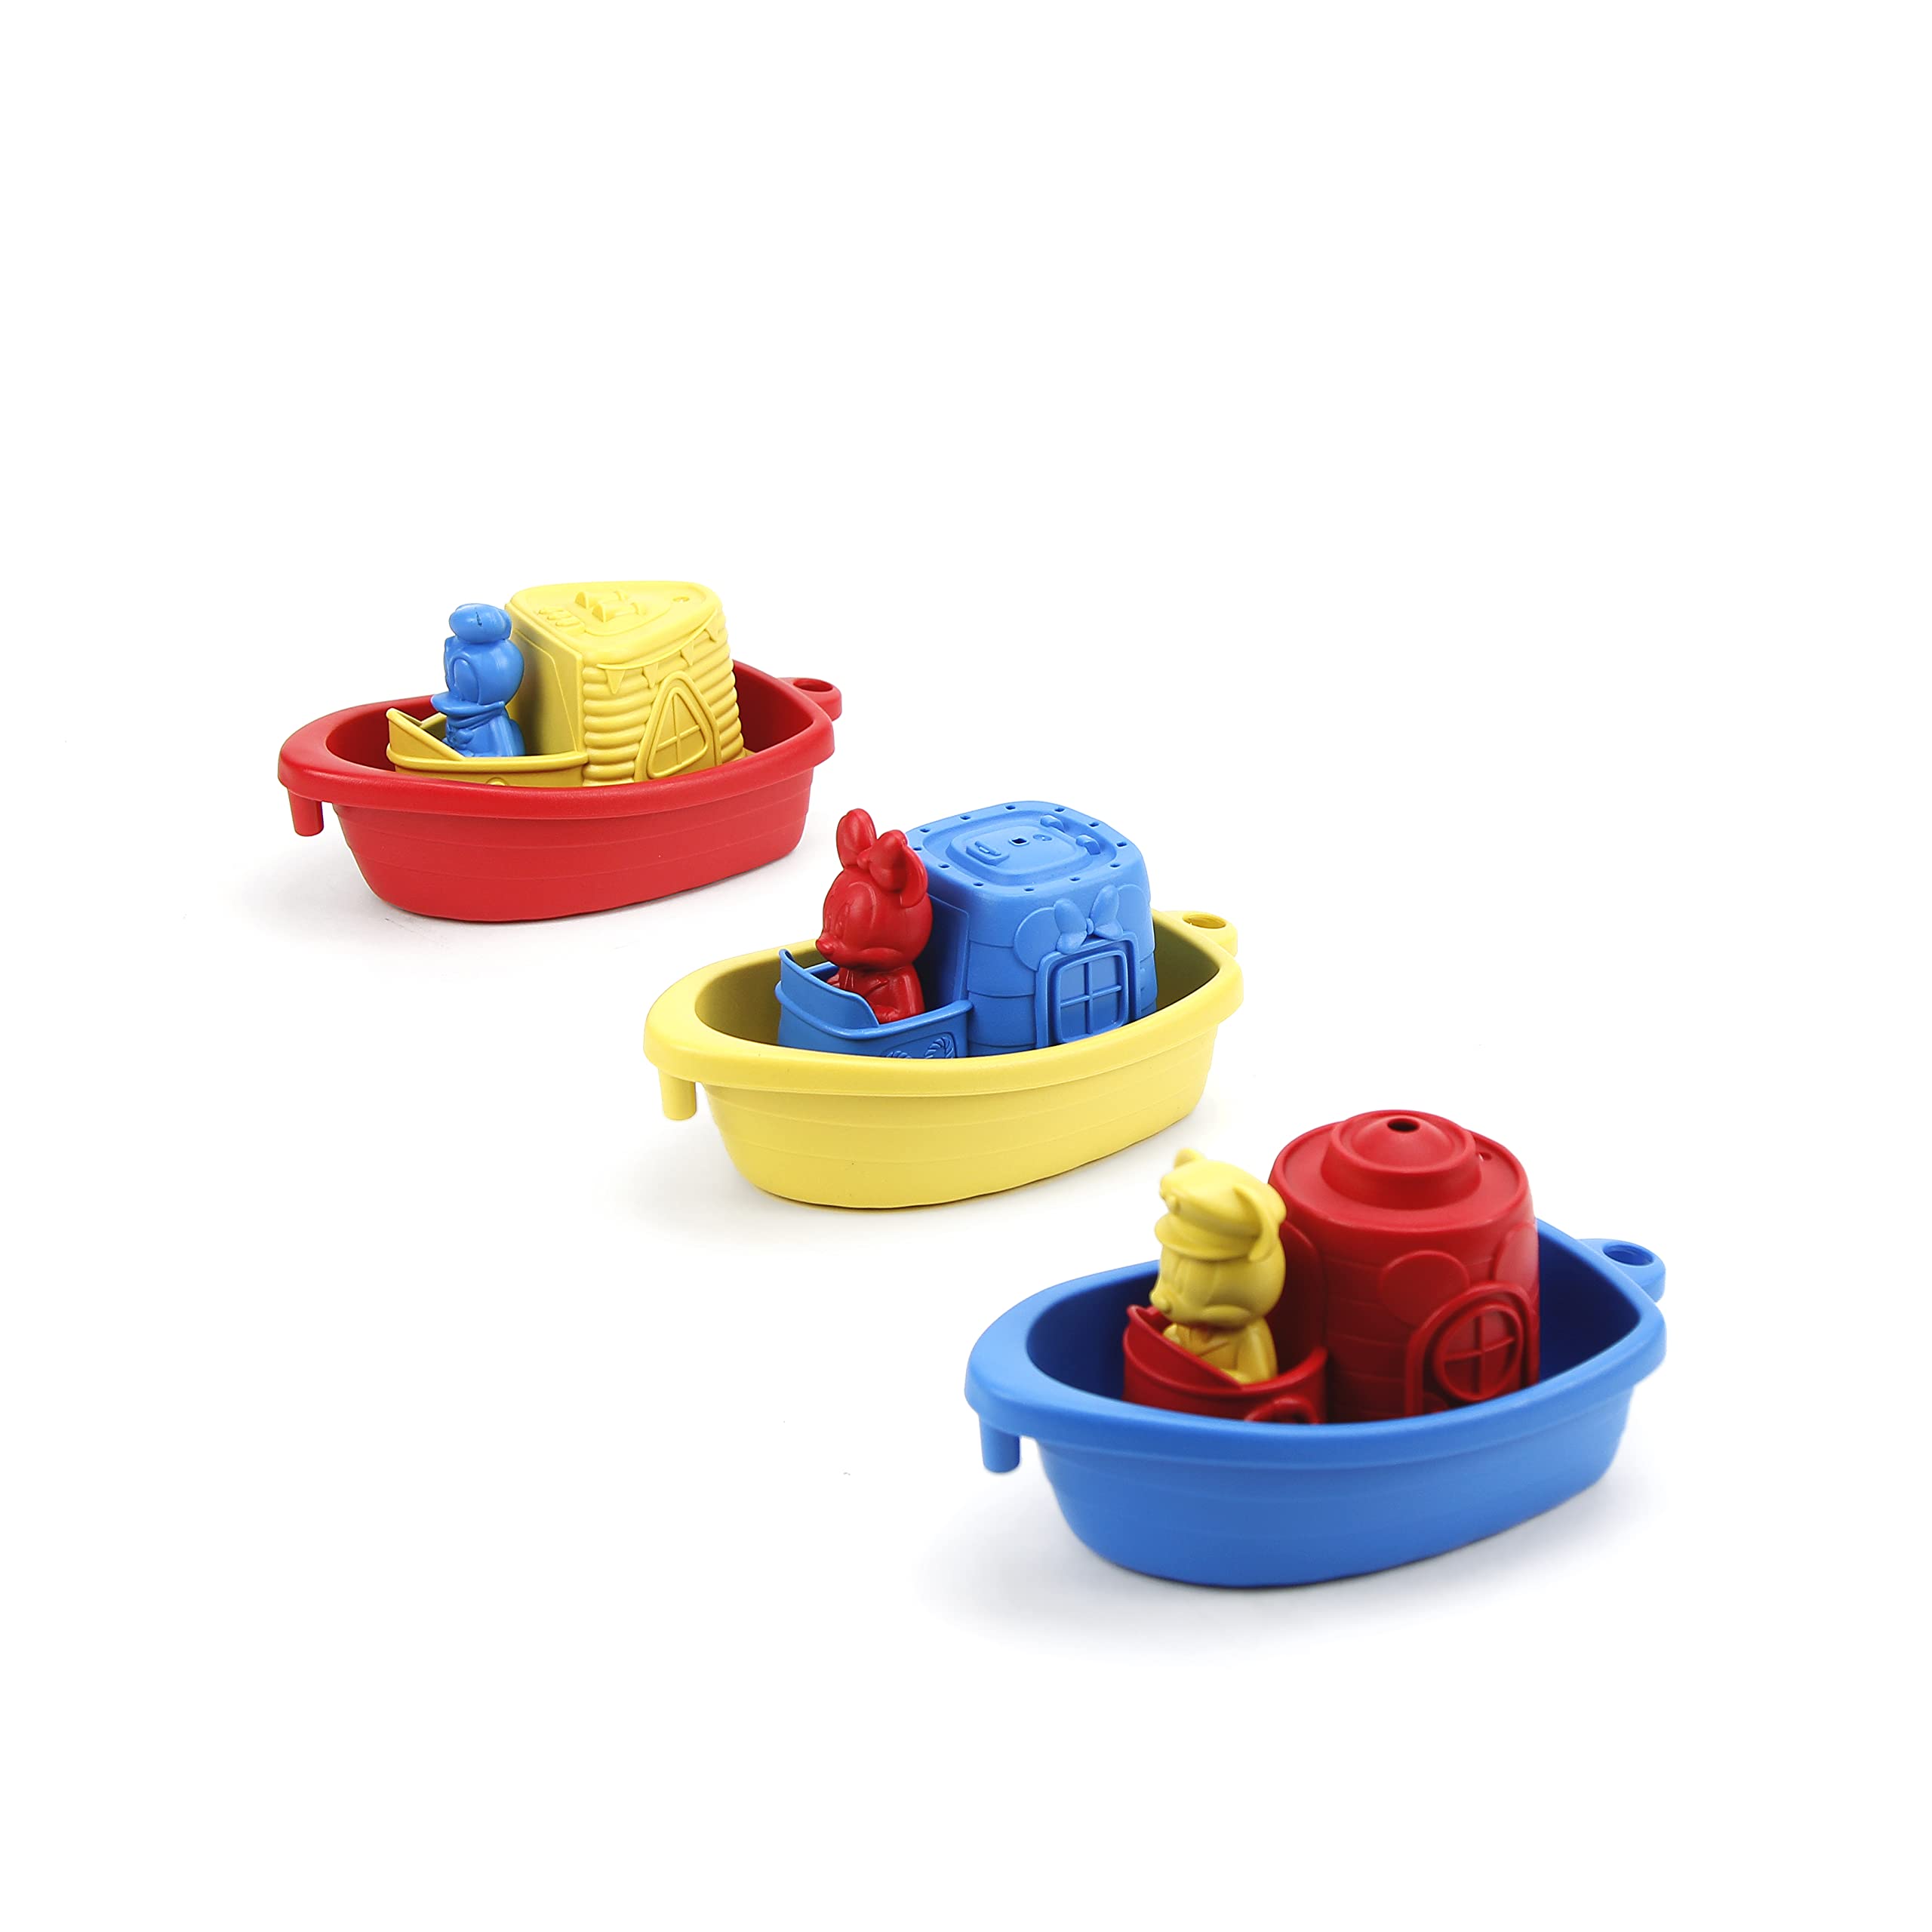 Green Toys Mickey Mouse Linking Boats